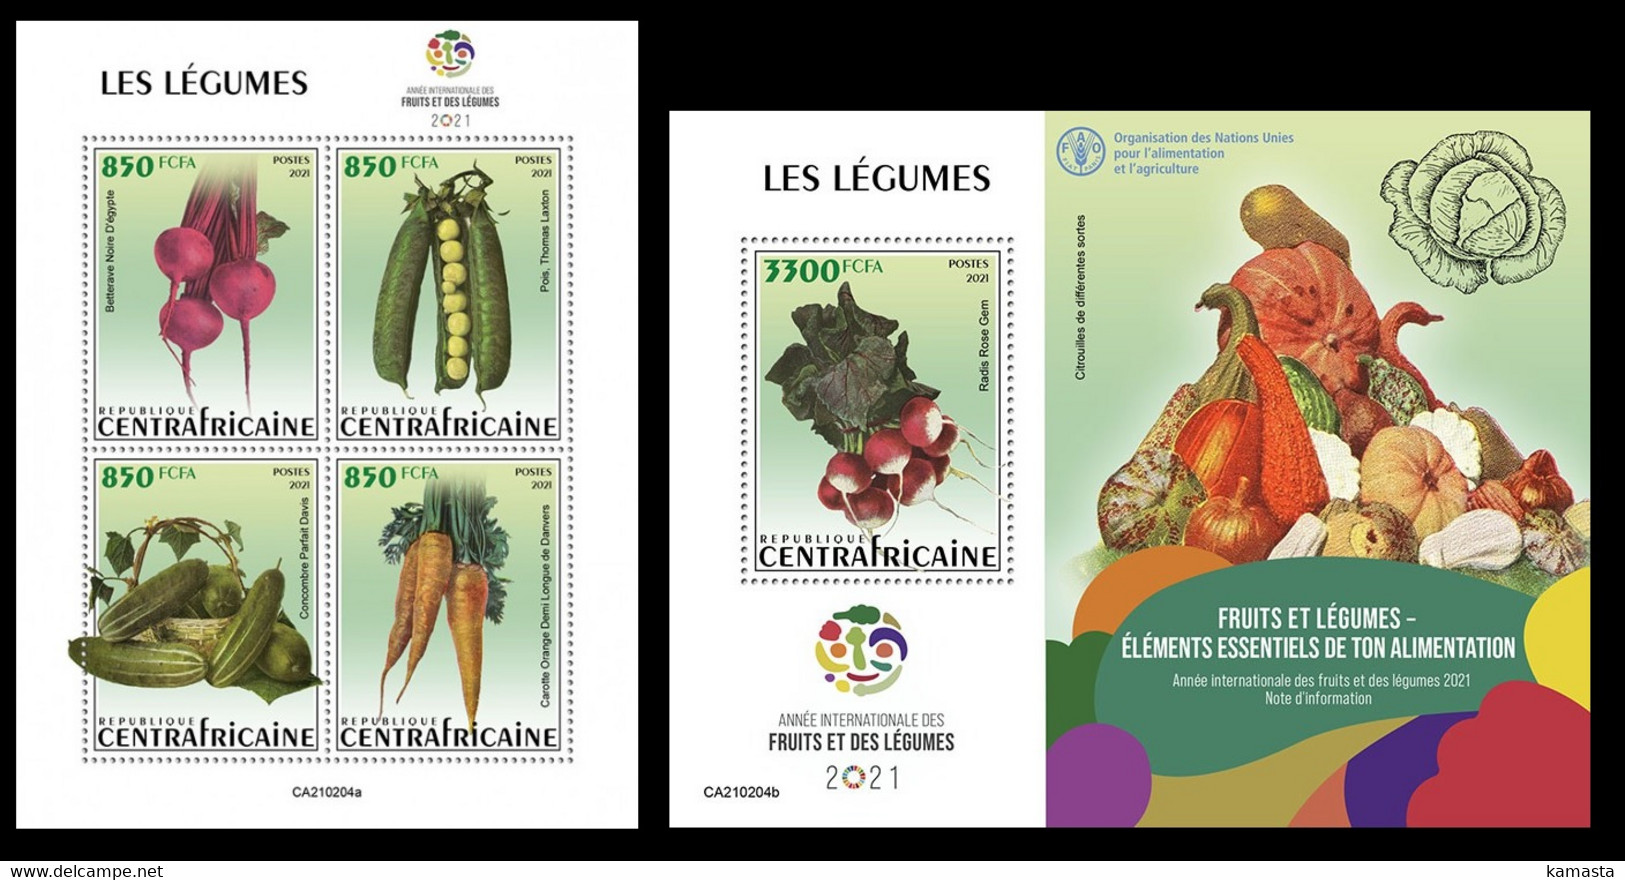 Central Africa 2021 Vegetables. (204) OFFICIAL ISSUE - Légumes